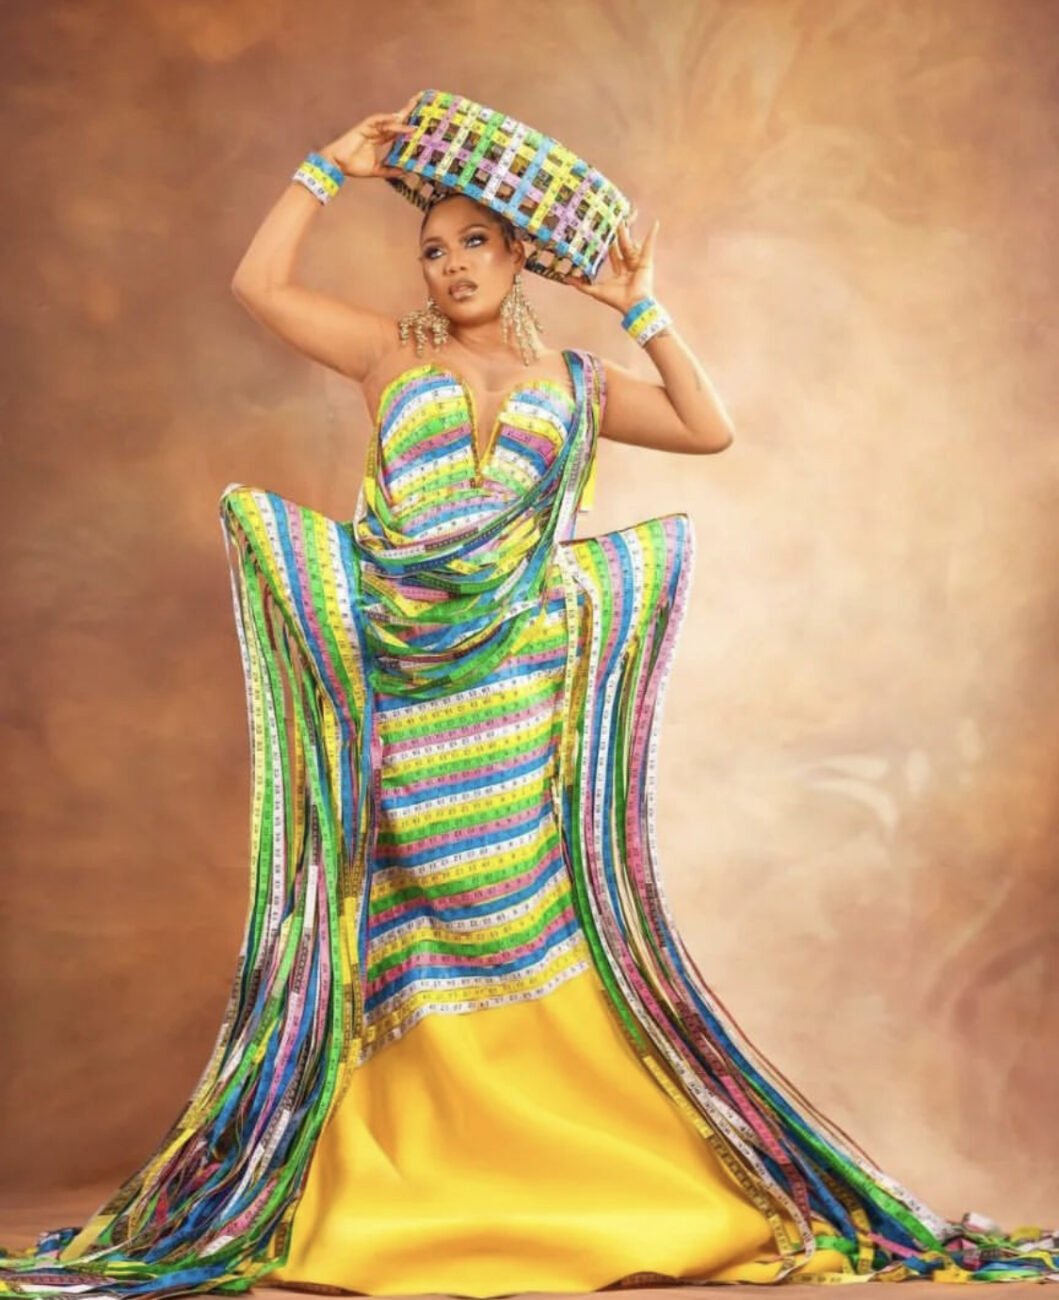 Toyin Lawani in a dress made out of tailor’s measuring tape.